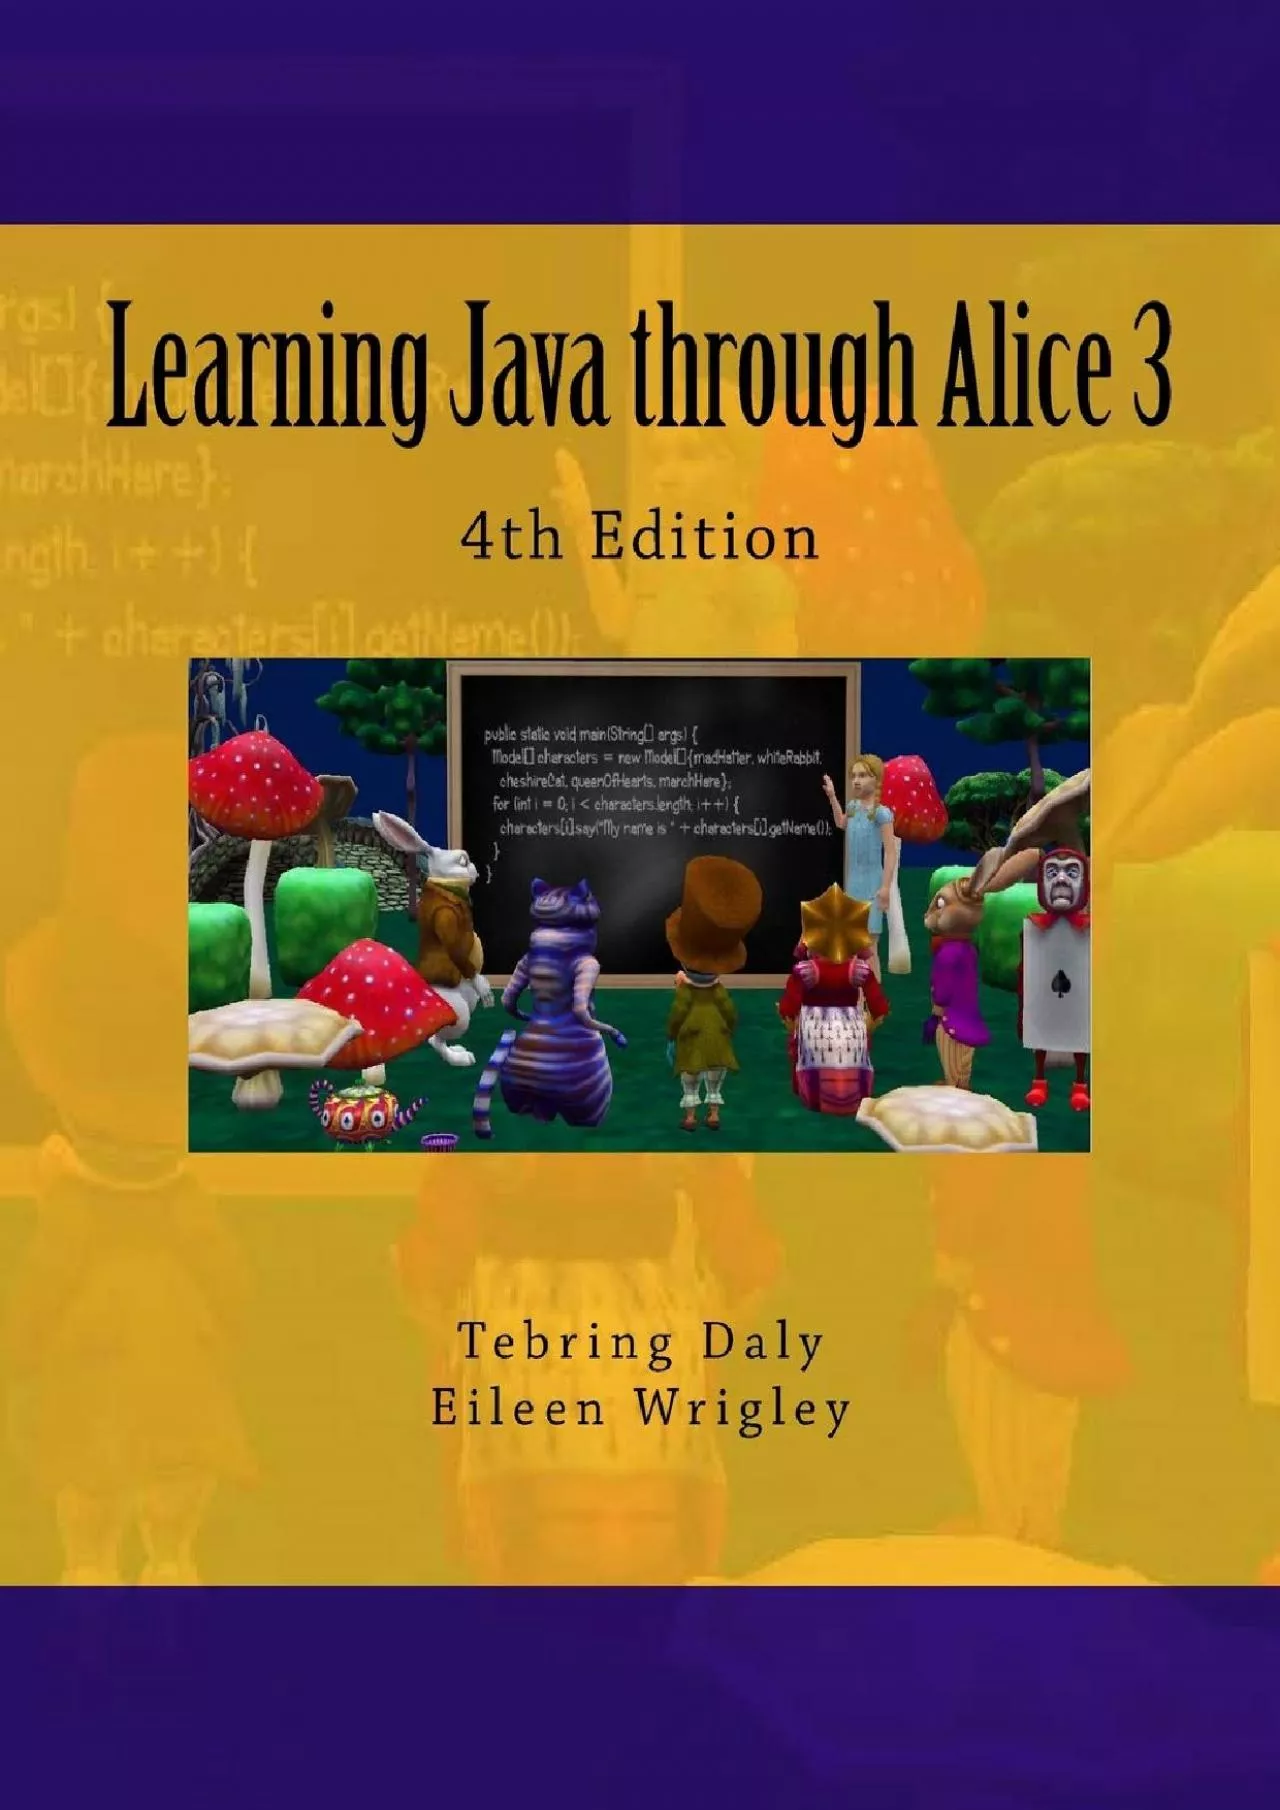 [FREE]-Learning Java through Alice 3